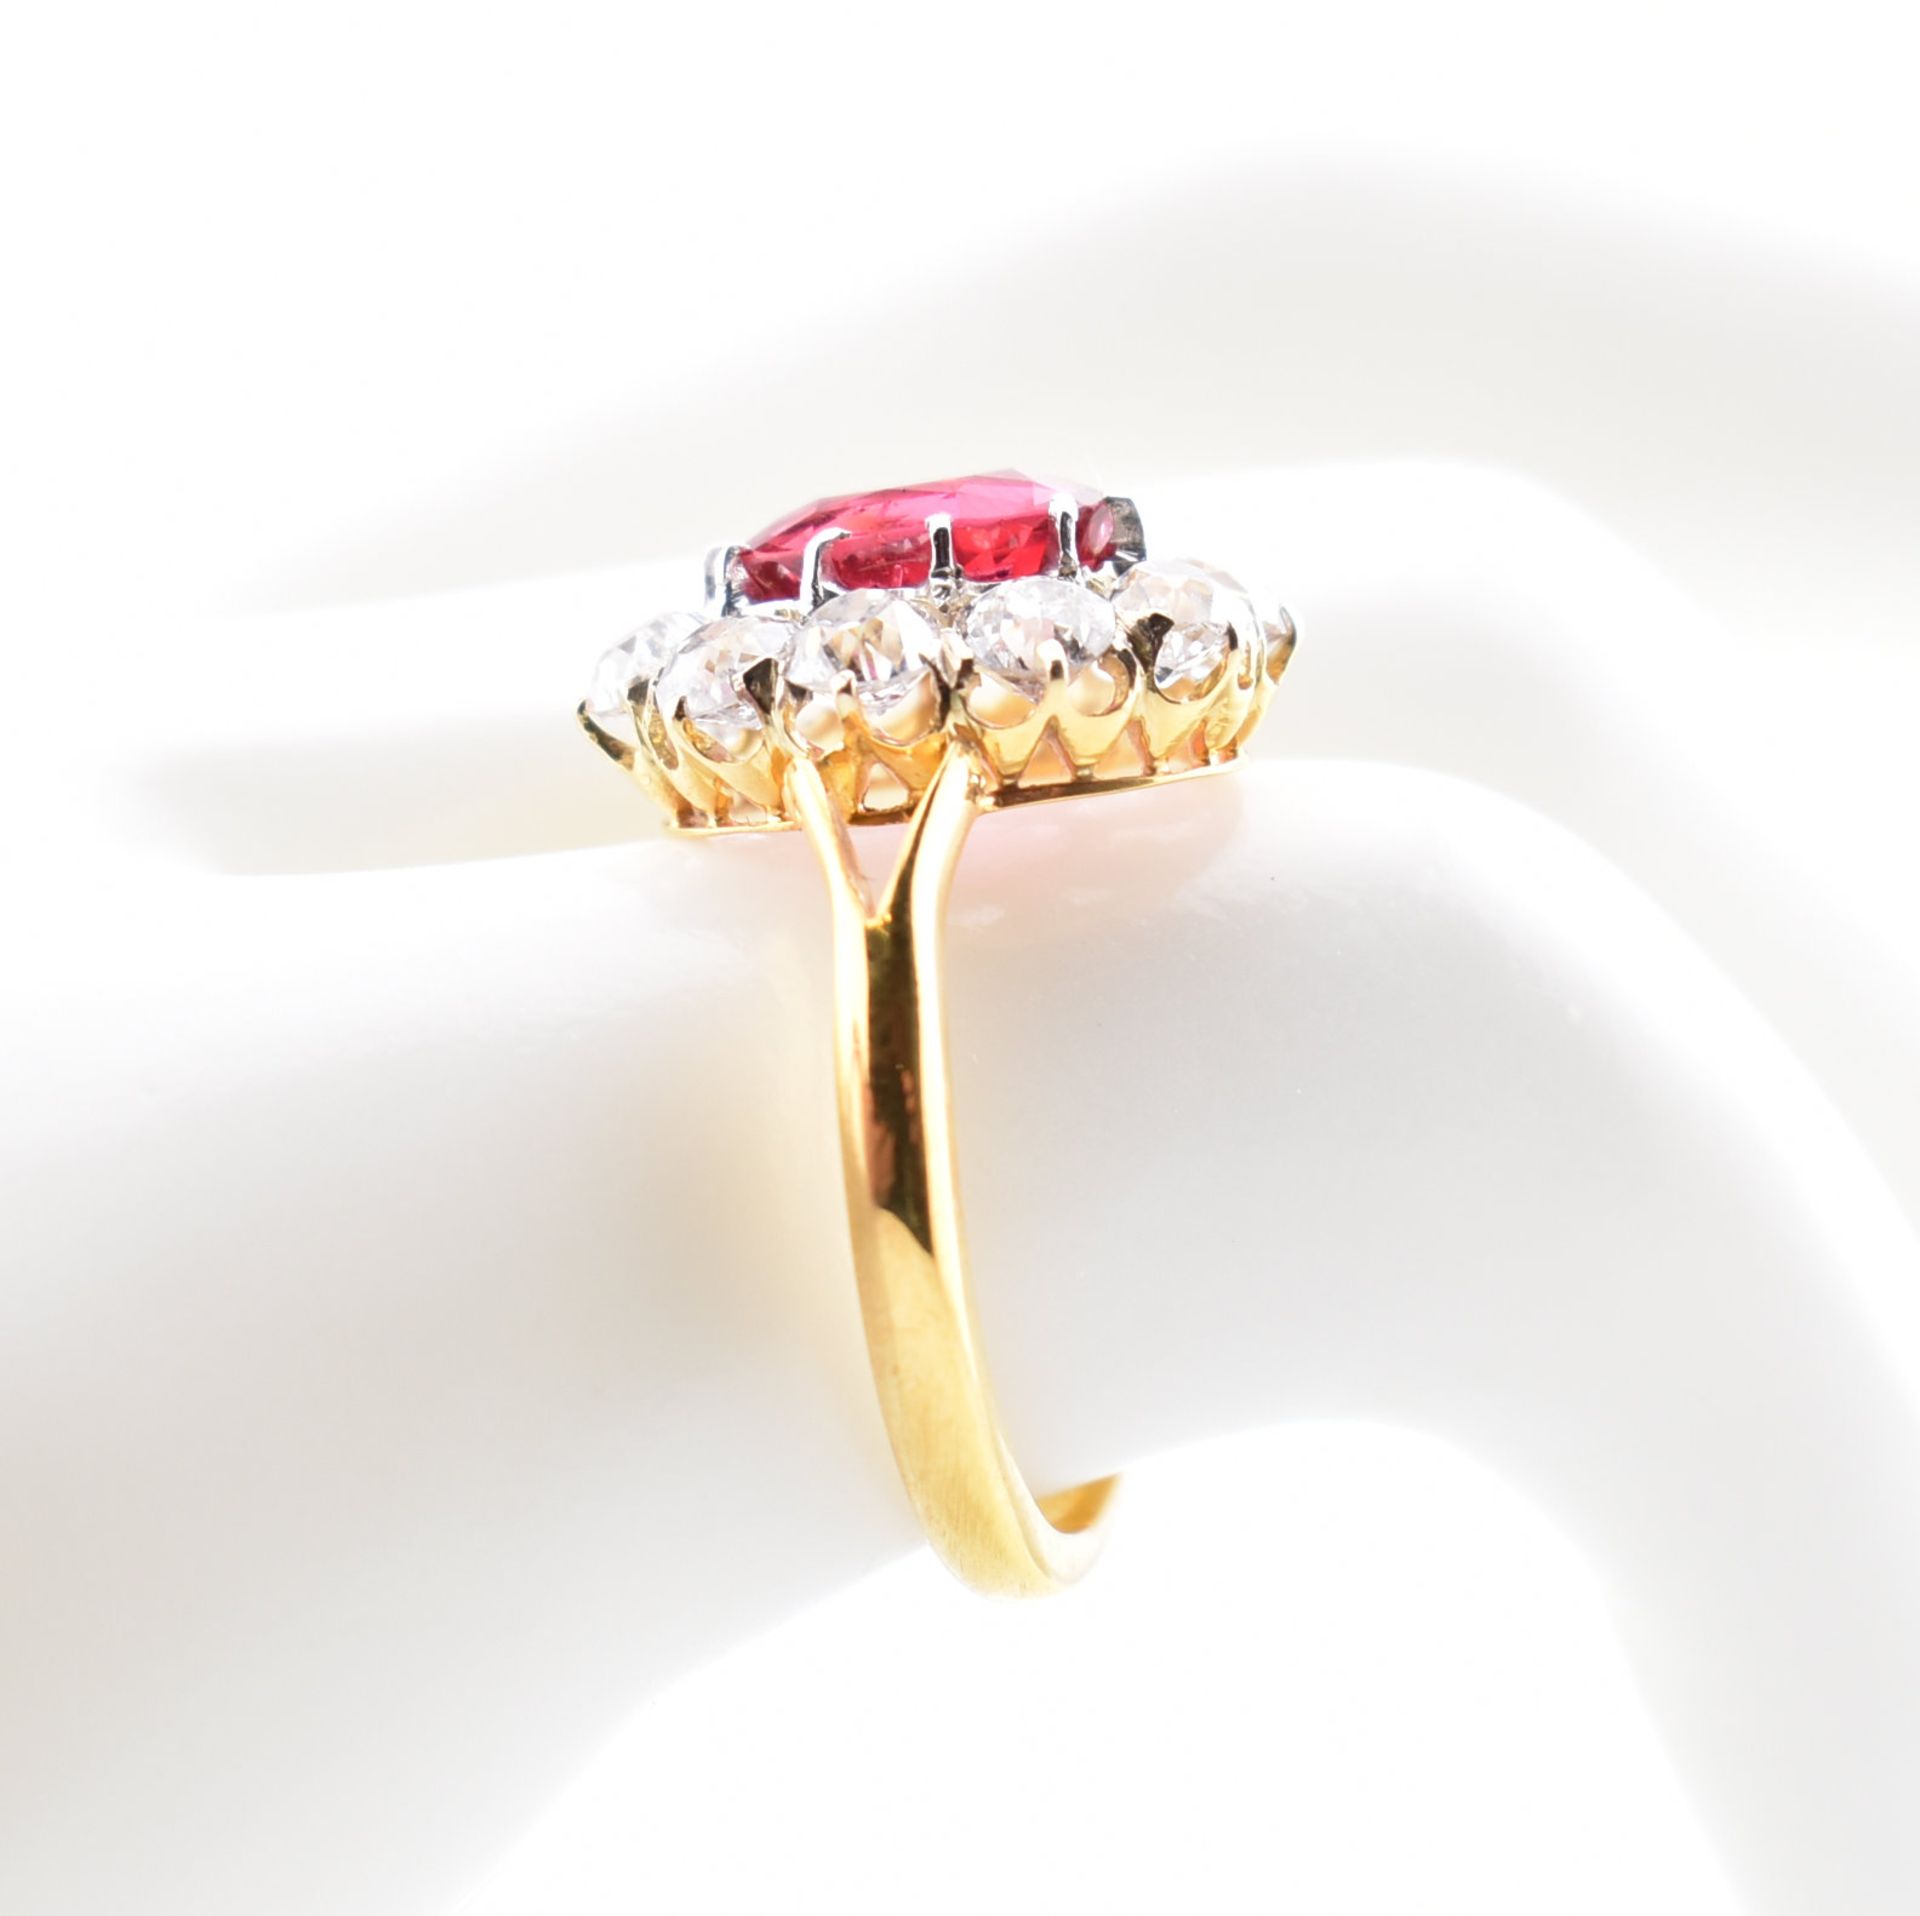 VICTORIAN RED SPINEL & DIAMOND CLUSTER RING - Image 8 of 12